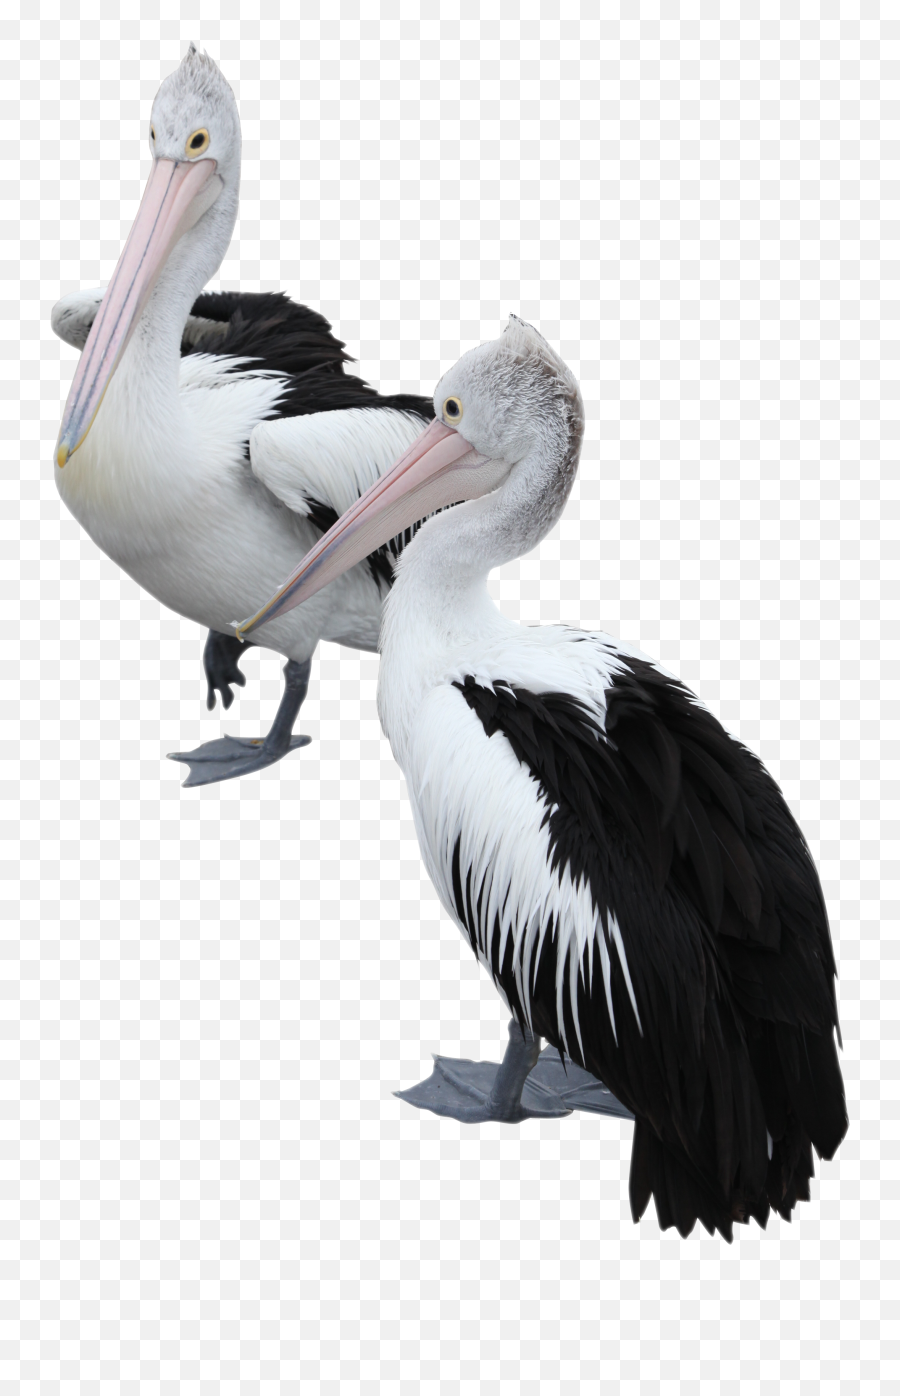 Download Two Pelicans Png Image For Free Logo